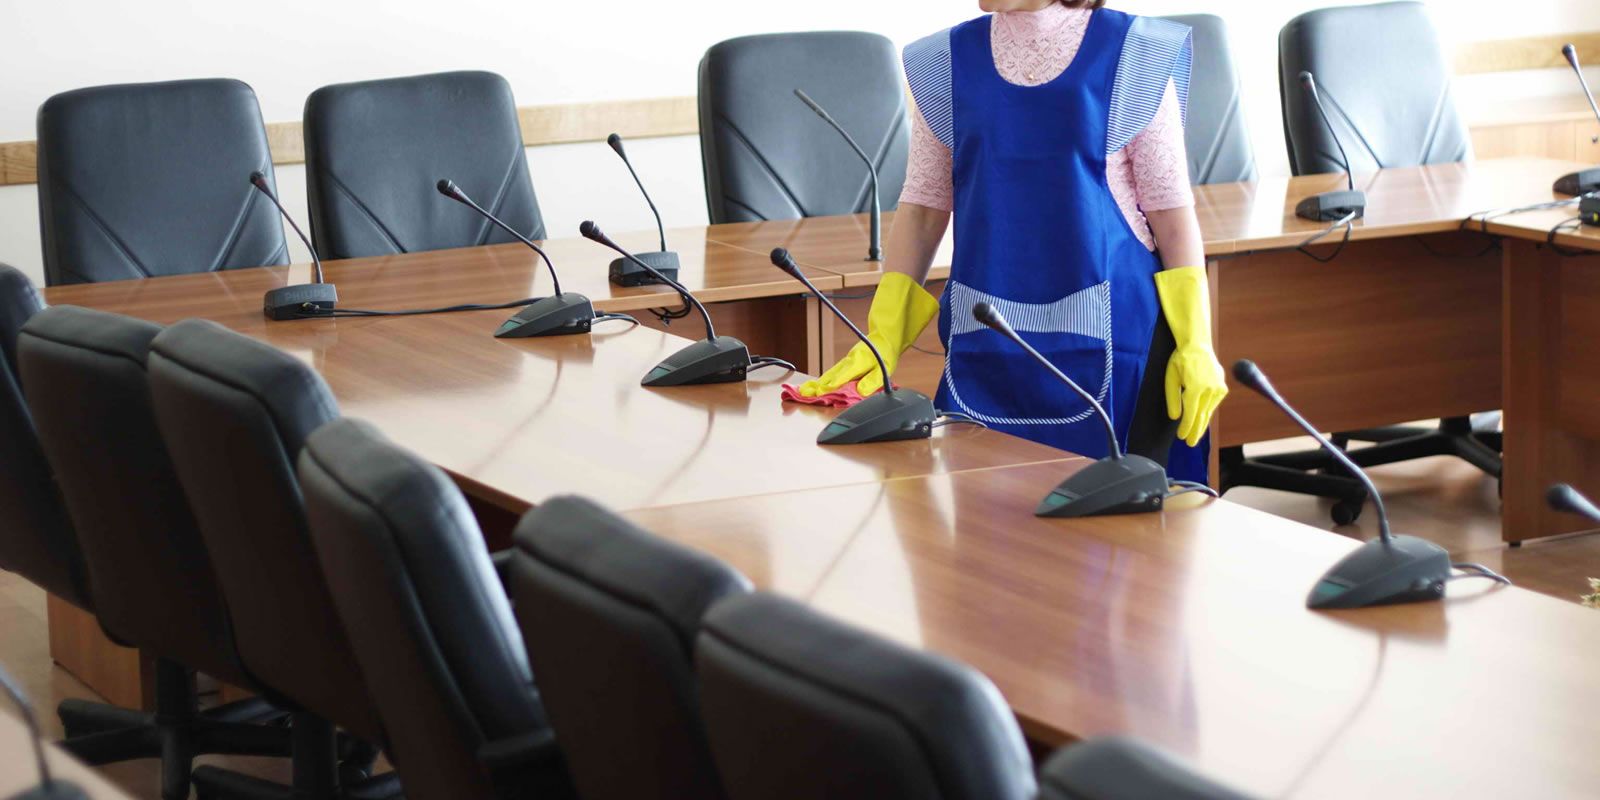 commercial cleaning services in Saint Paul, MN